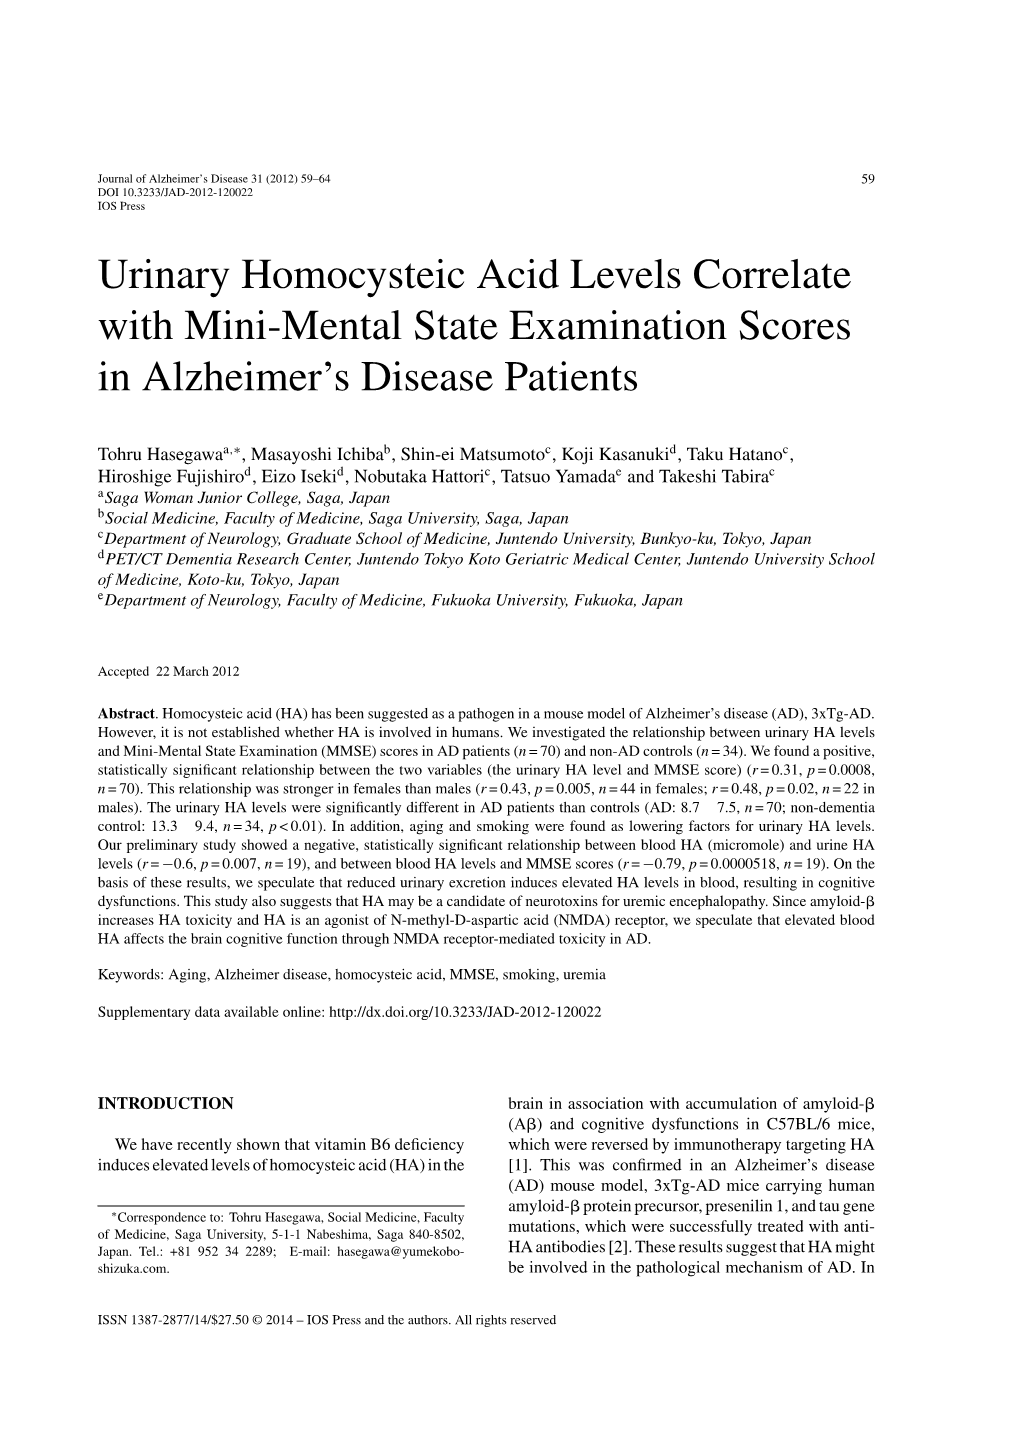 Urinary Homocysteic Acid Levels Correlate with Mini-Mental State Examination Scores in Alzheimer’S Disease Patients